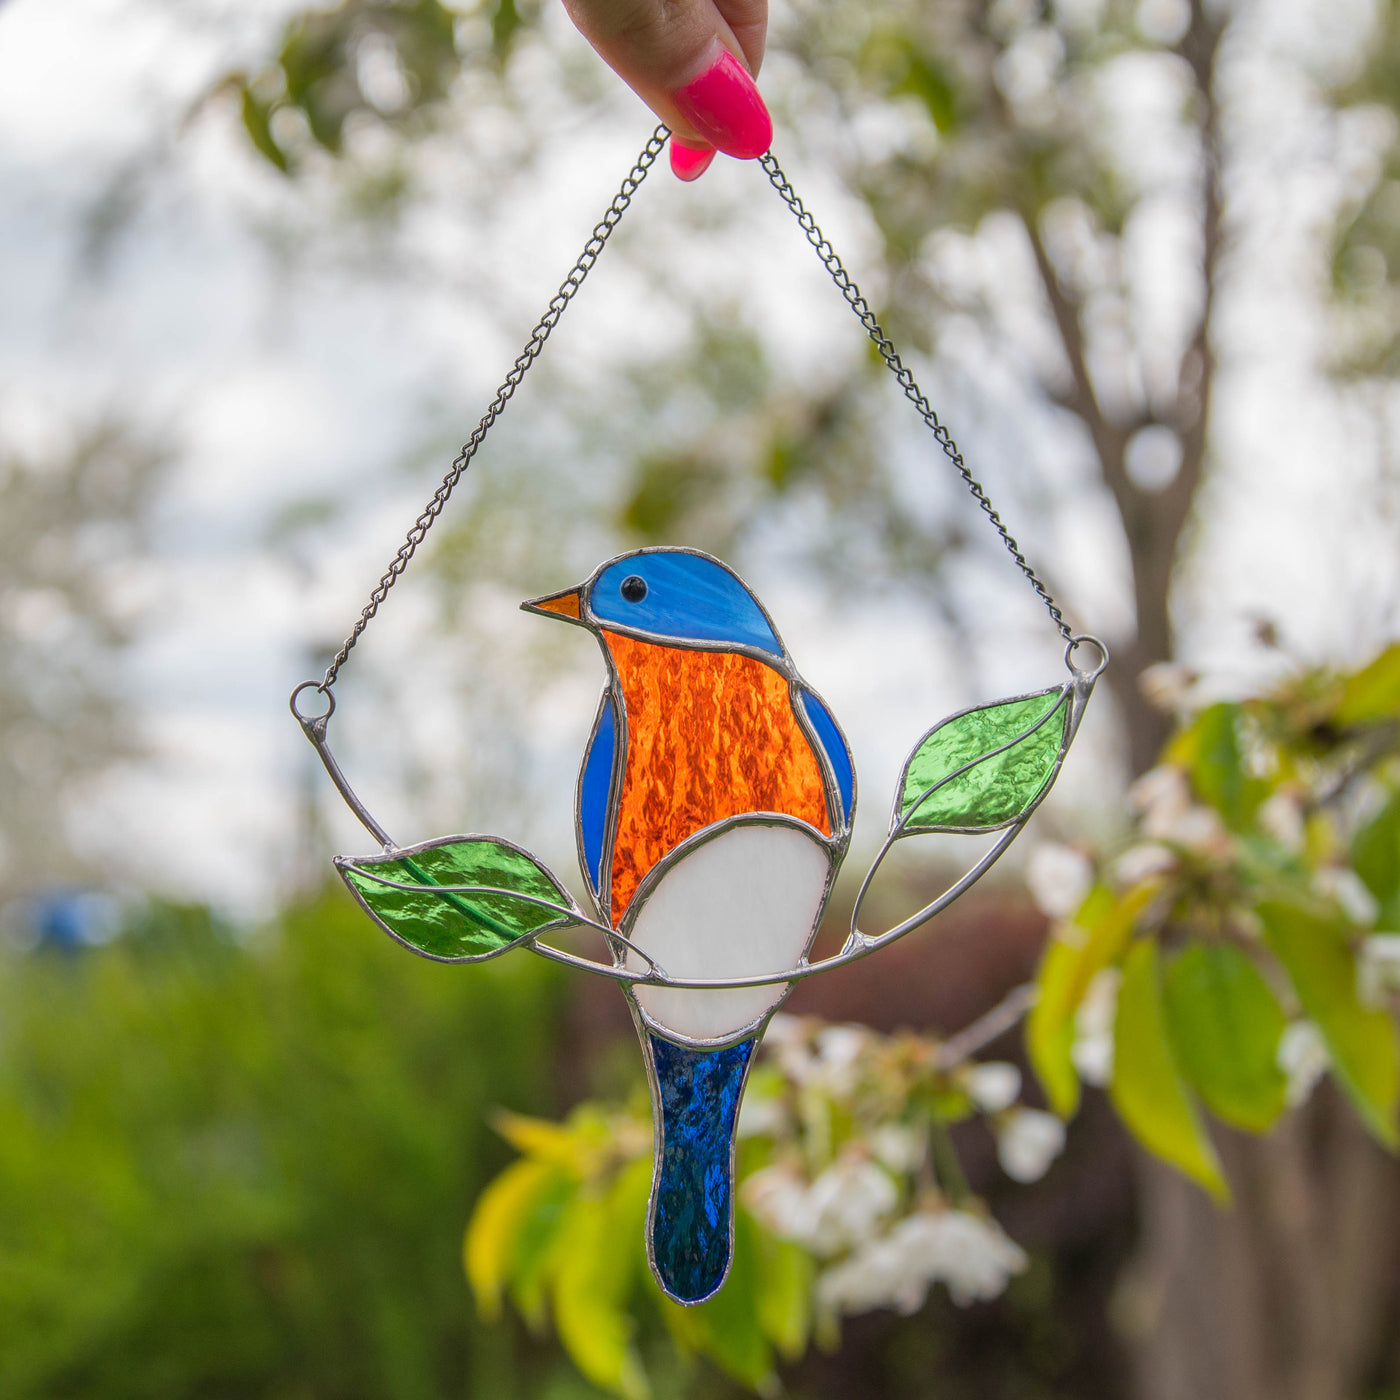 Bluebird on the chain stained glass suncatcher